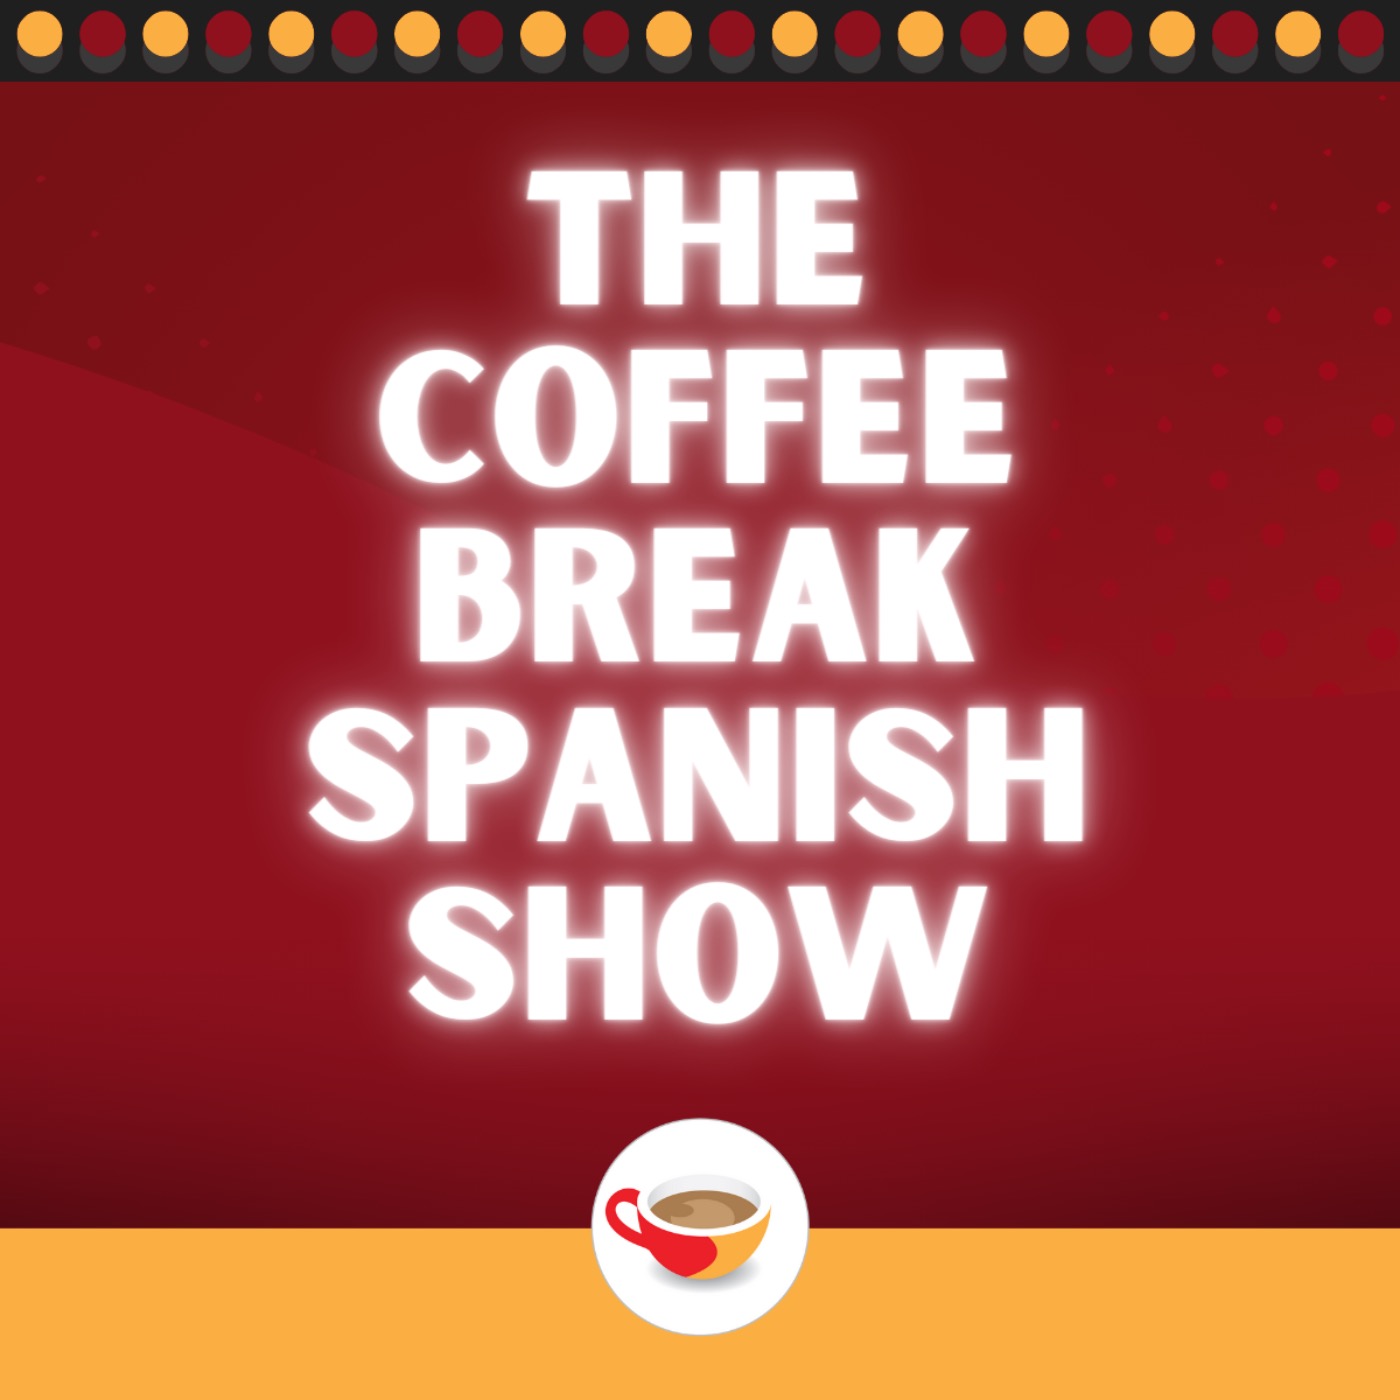 When to use ’el’ with feminine nouns - ’El agua’, ’el hambre’ and other examples | The Coffee Break Spanish Show 1.02